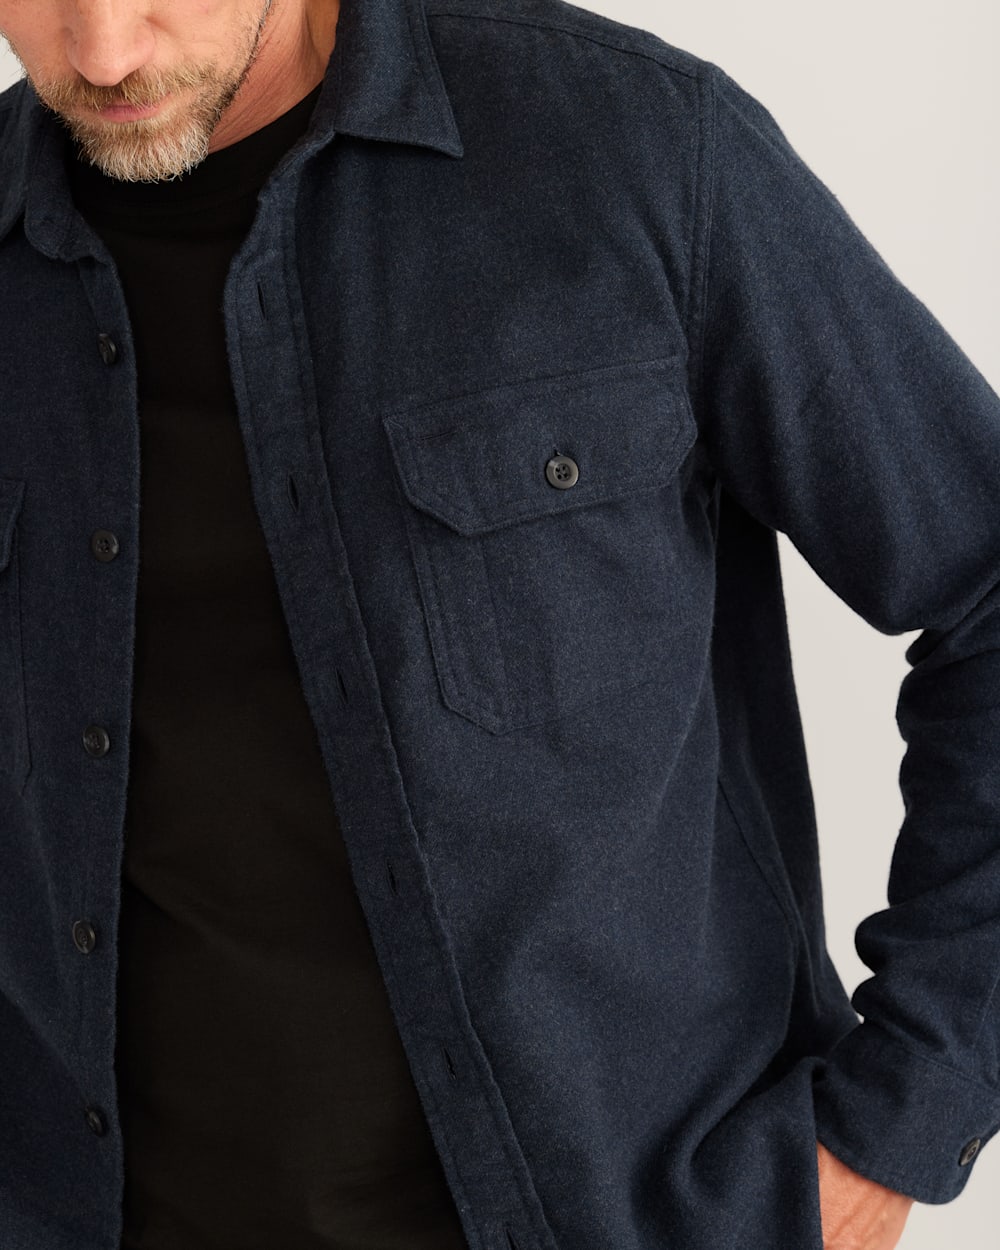 ALTERNATE VIEW OF MEN'S BURNSIDE DOUBLE-BRUSHED FLANNEL SHIRT IN NAVY HEATHER image number 5